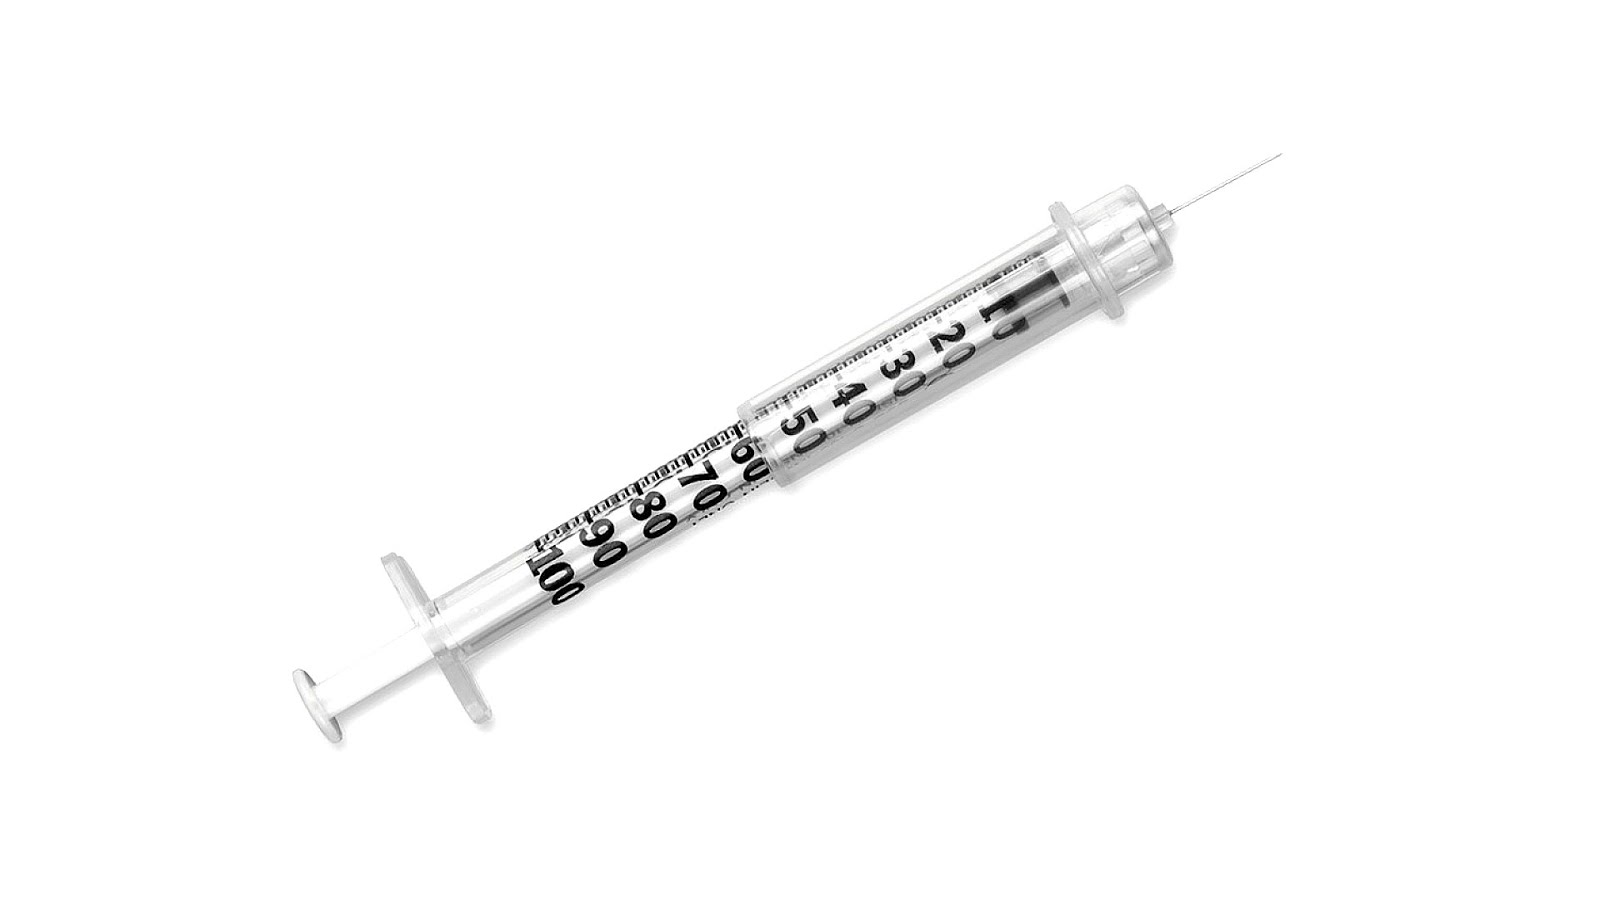 Needle Gauge For Insulin - Insulin Choices